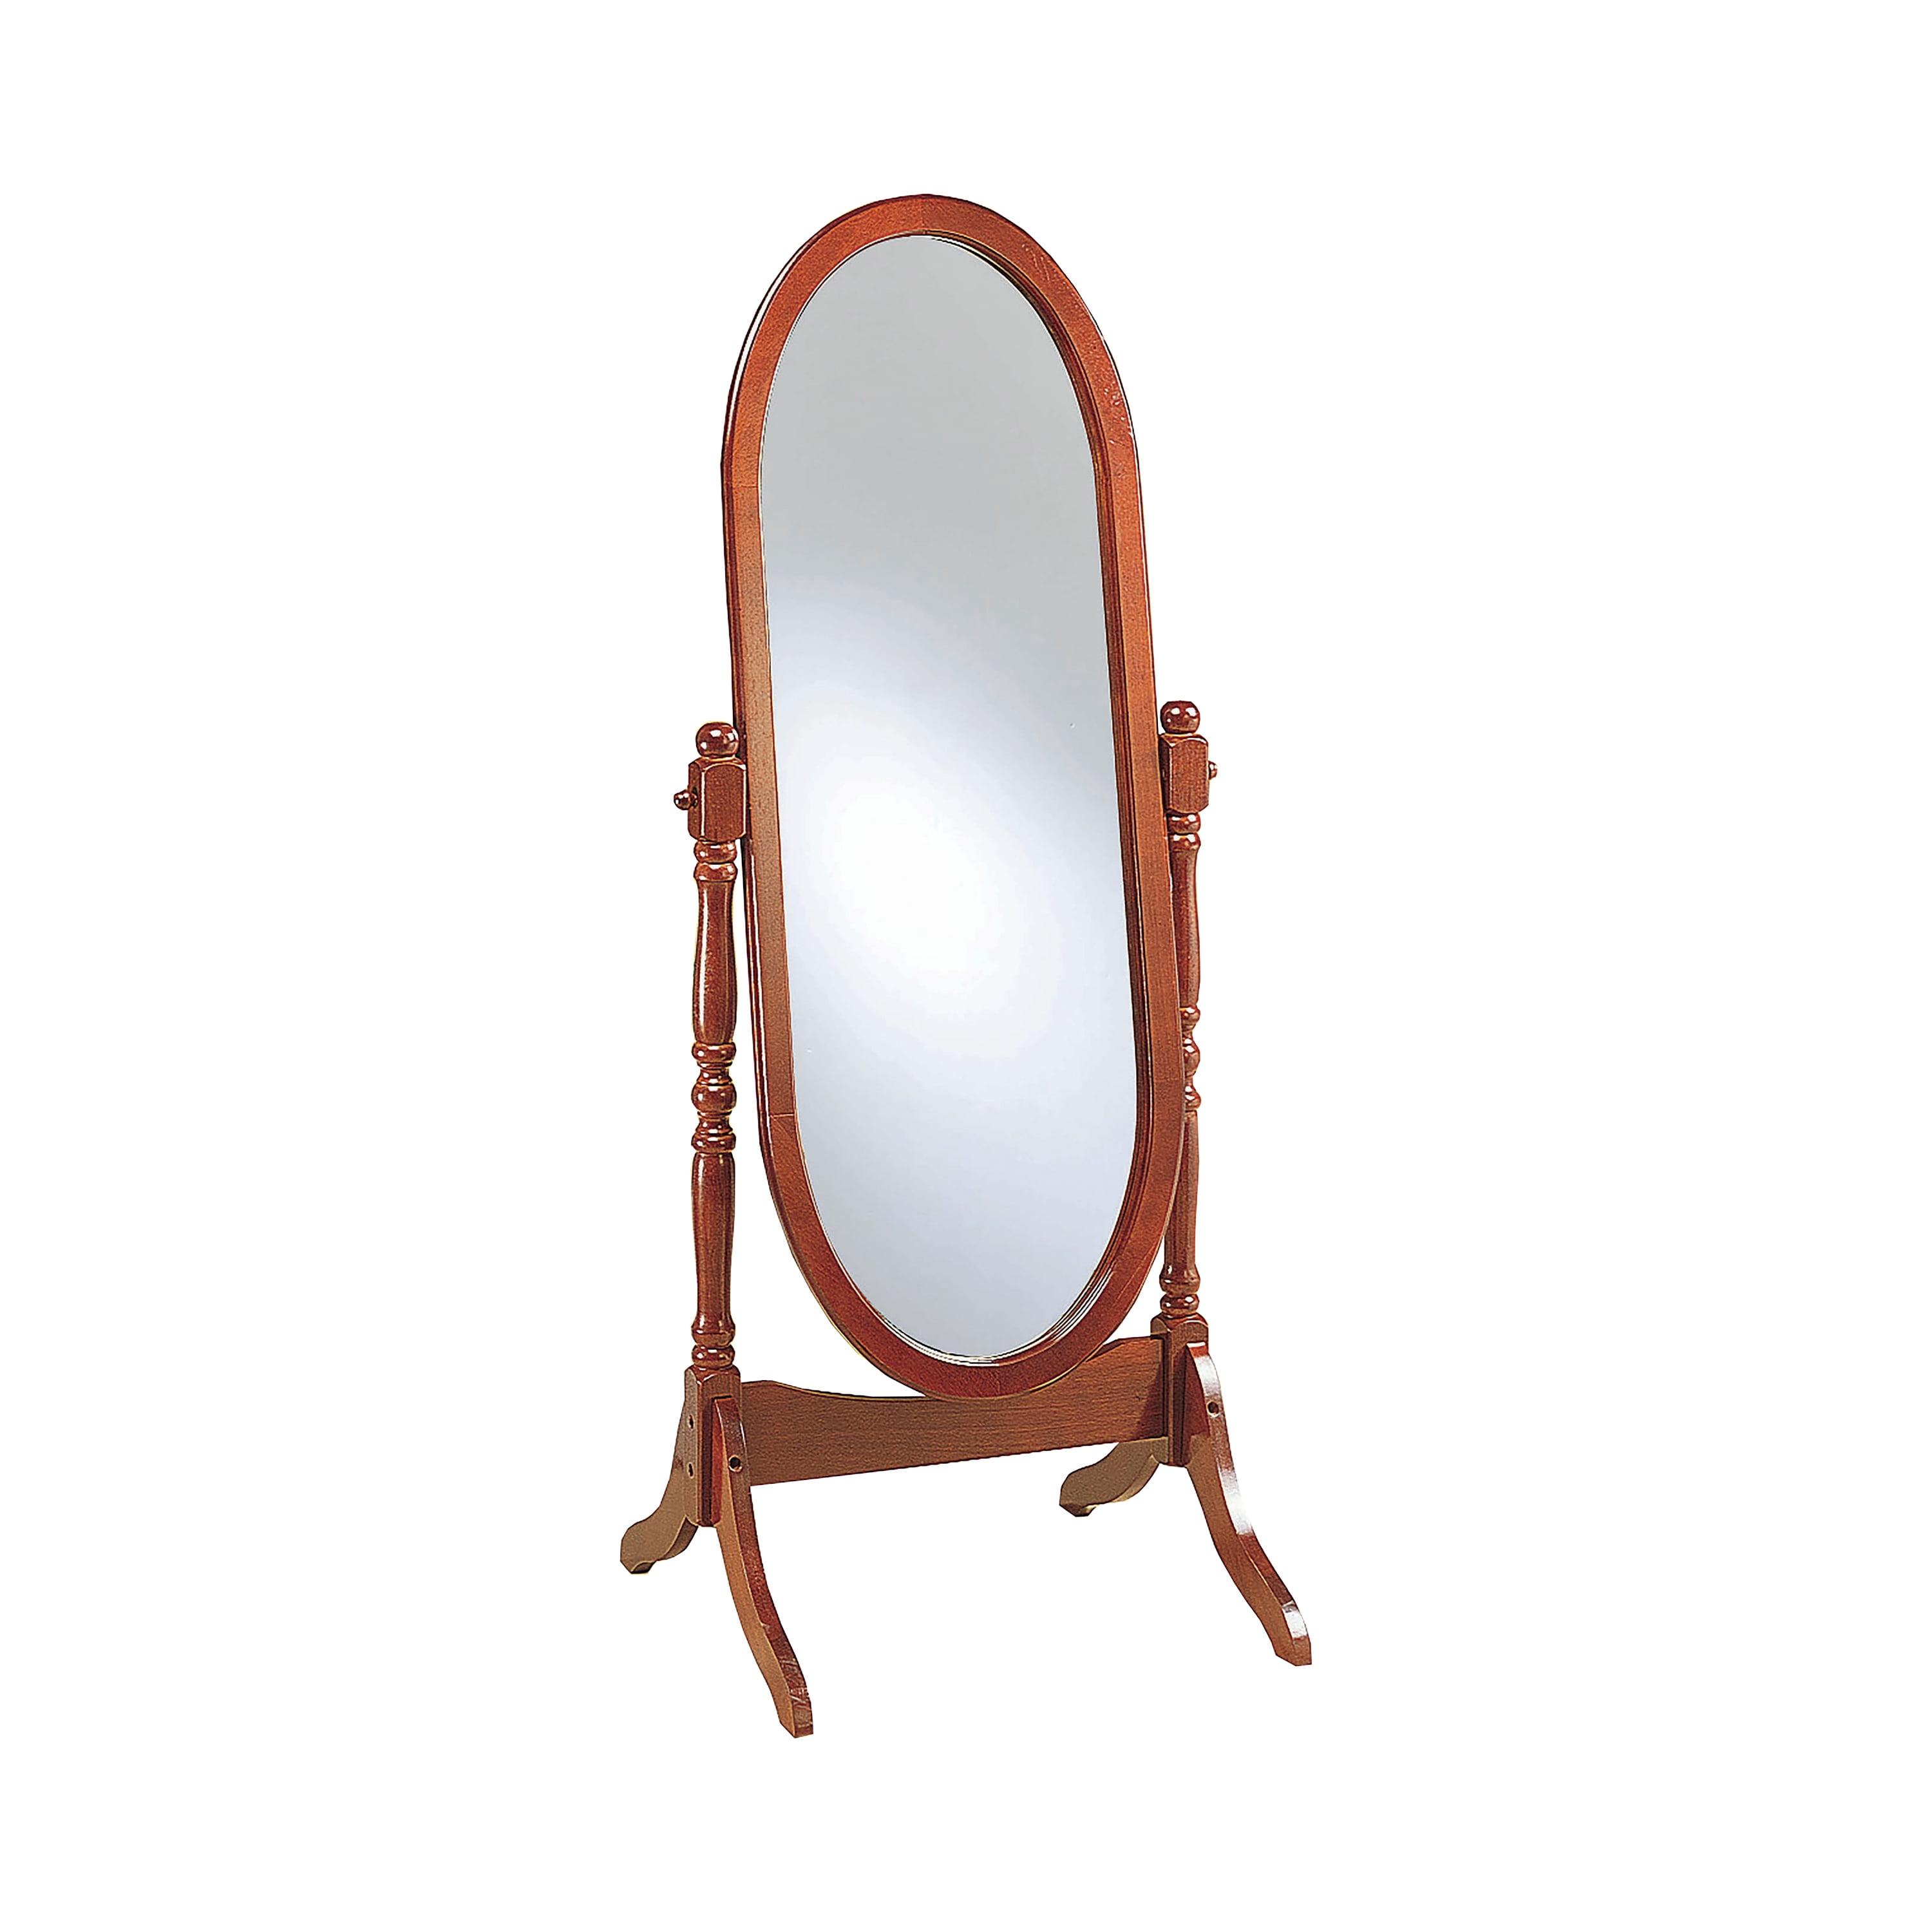 Elegant Full-Length Oval Wood Cheval Mirror in Rich Brown